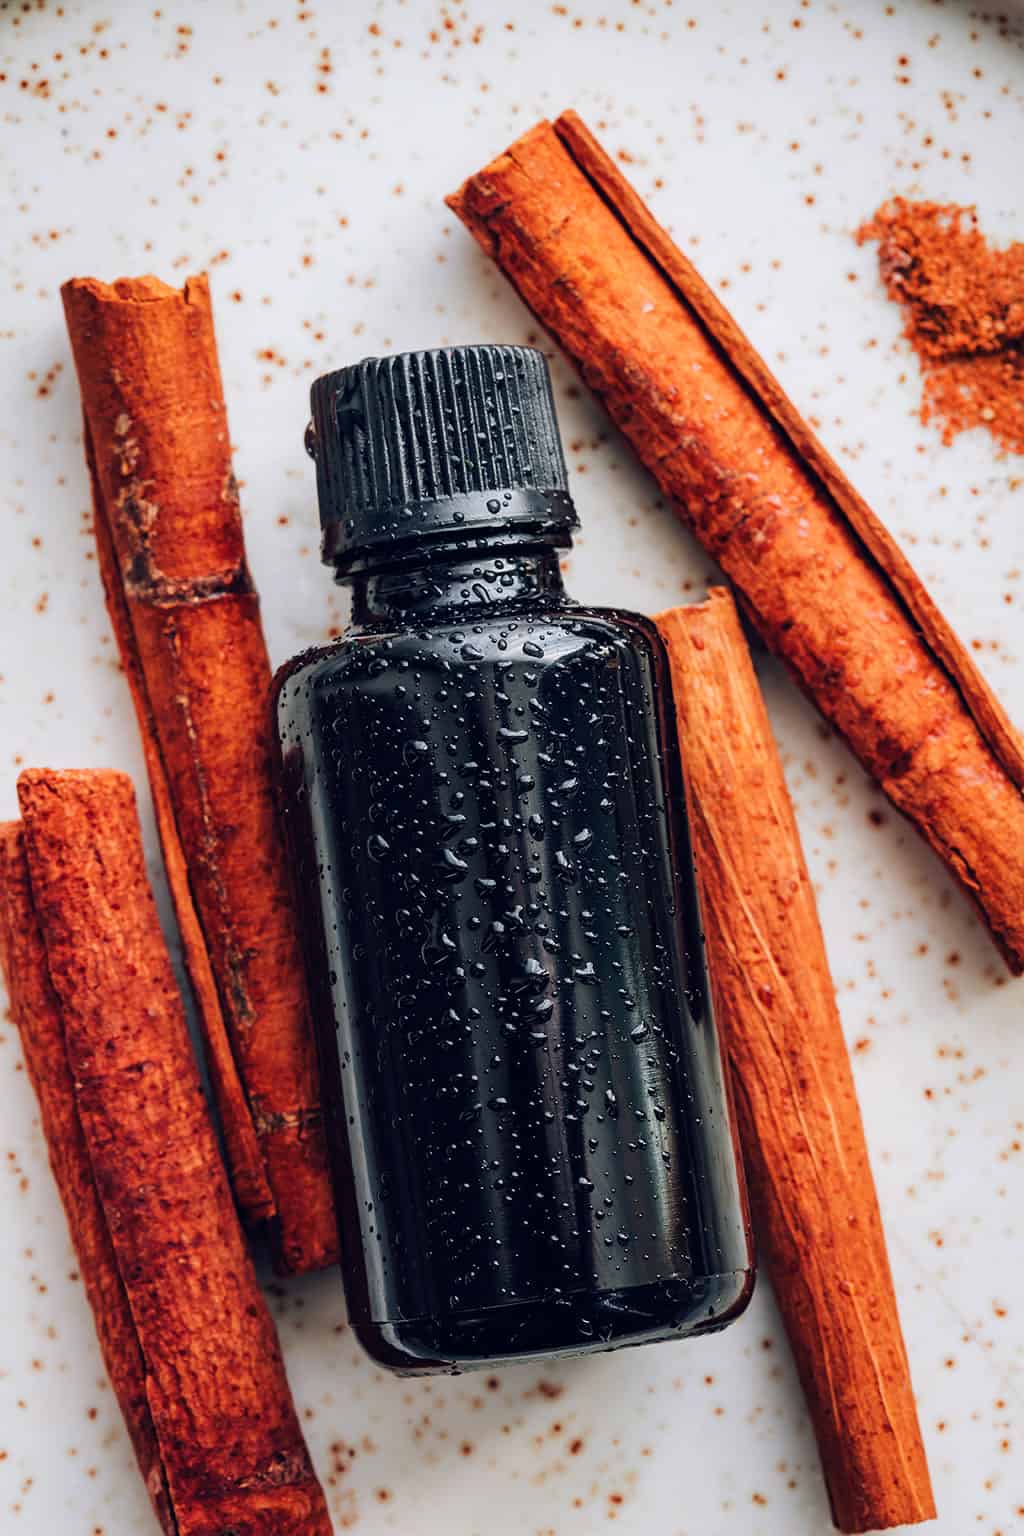 6 Easy Uses for Cinnamon Essential Oil